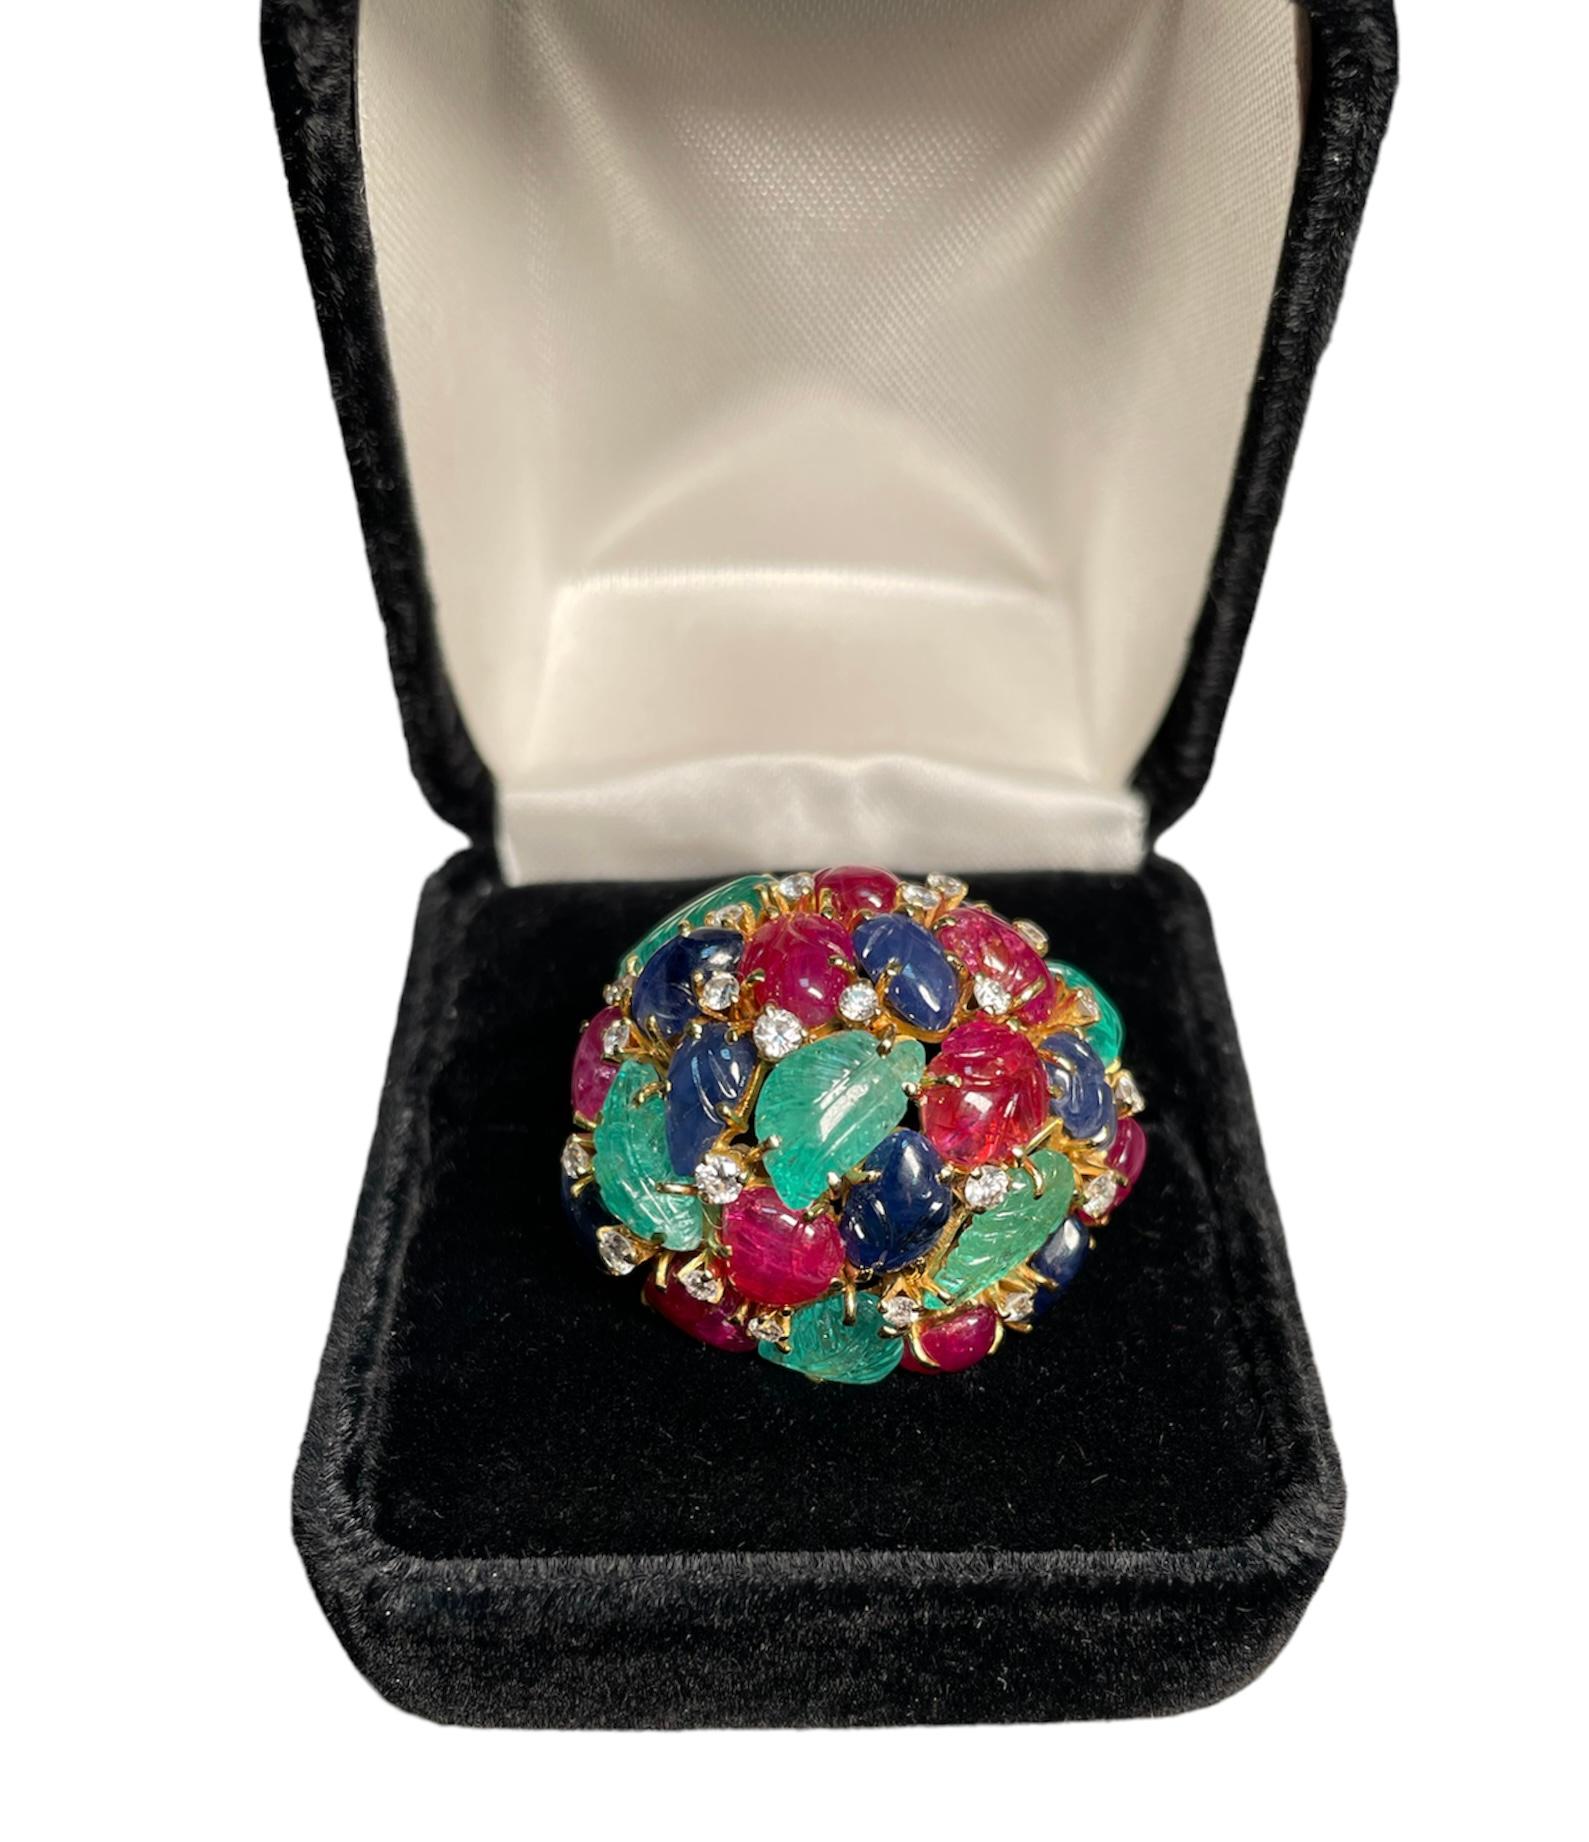 This is an 18k yellow gold 45.80 ct (gemstones) Tutti-frutti cocktail ring. It depicts a dome made of polychromatic mosaic of hand carved leaves made of different gemstones. This mosaic of gemstones are green emeralds (6), red rubies (9) and blue